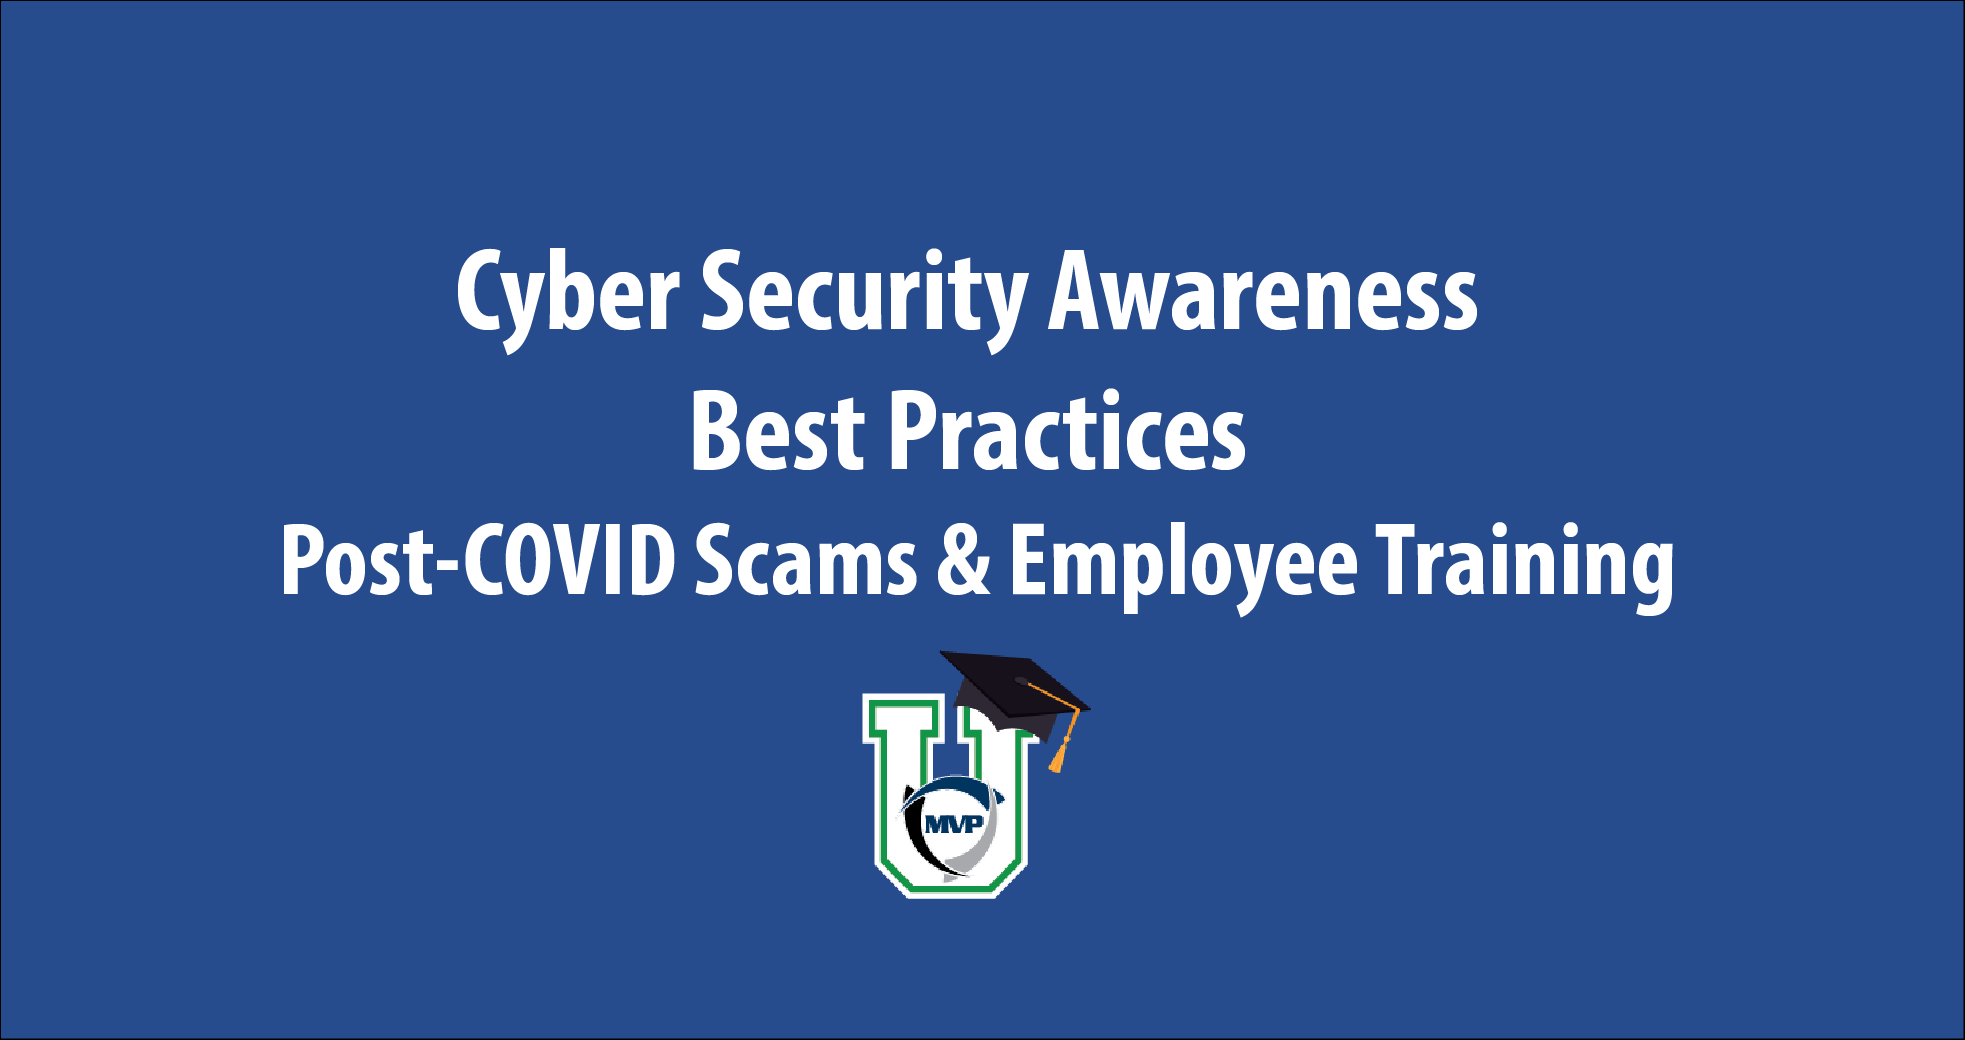 Cyber Security Awareness Best Practices - Post-COVID Scam & Employee Training